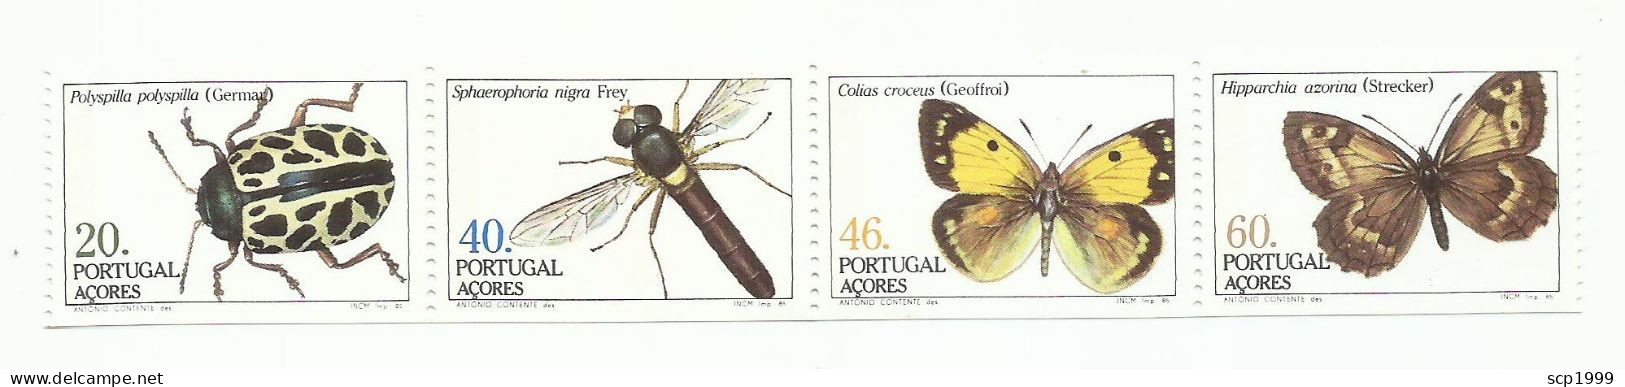 Portugal 1985 - Azores Insects Booklet MNH - Markenheftchen